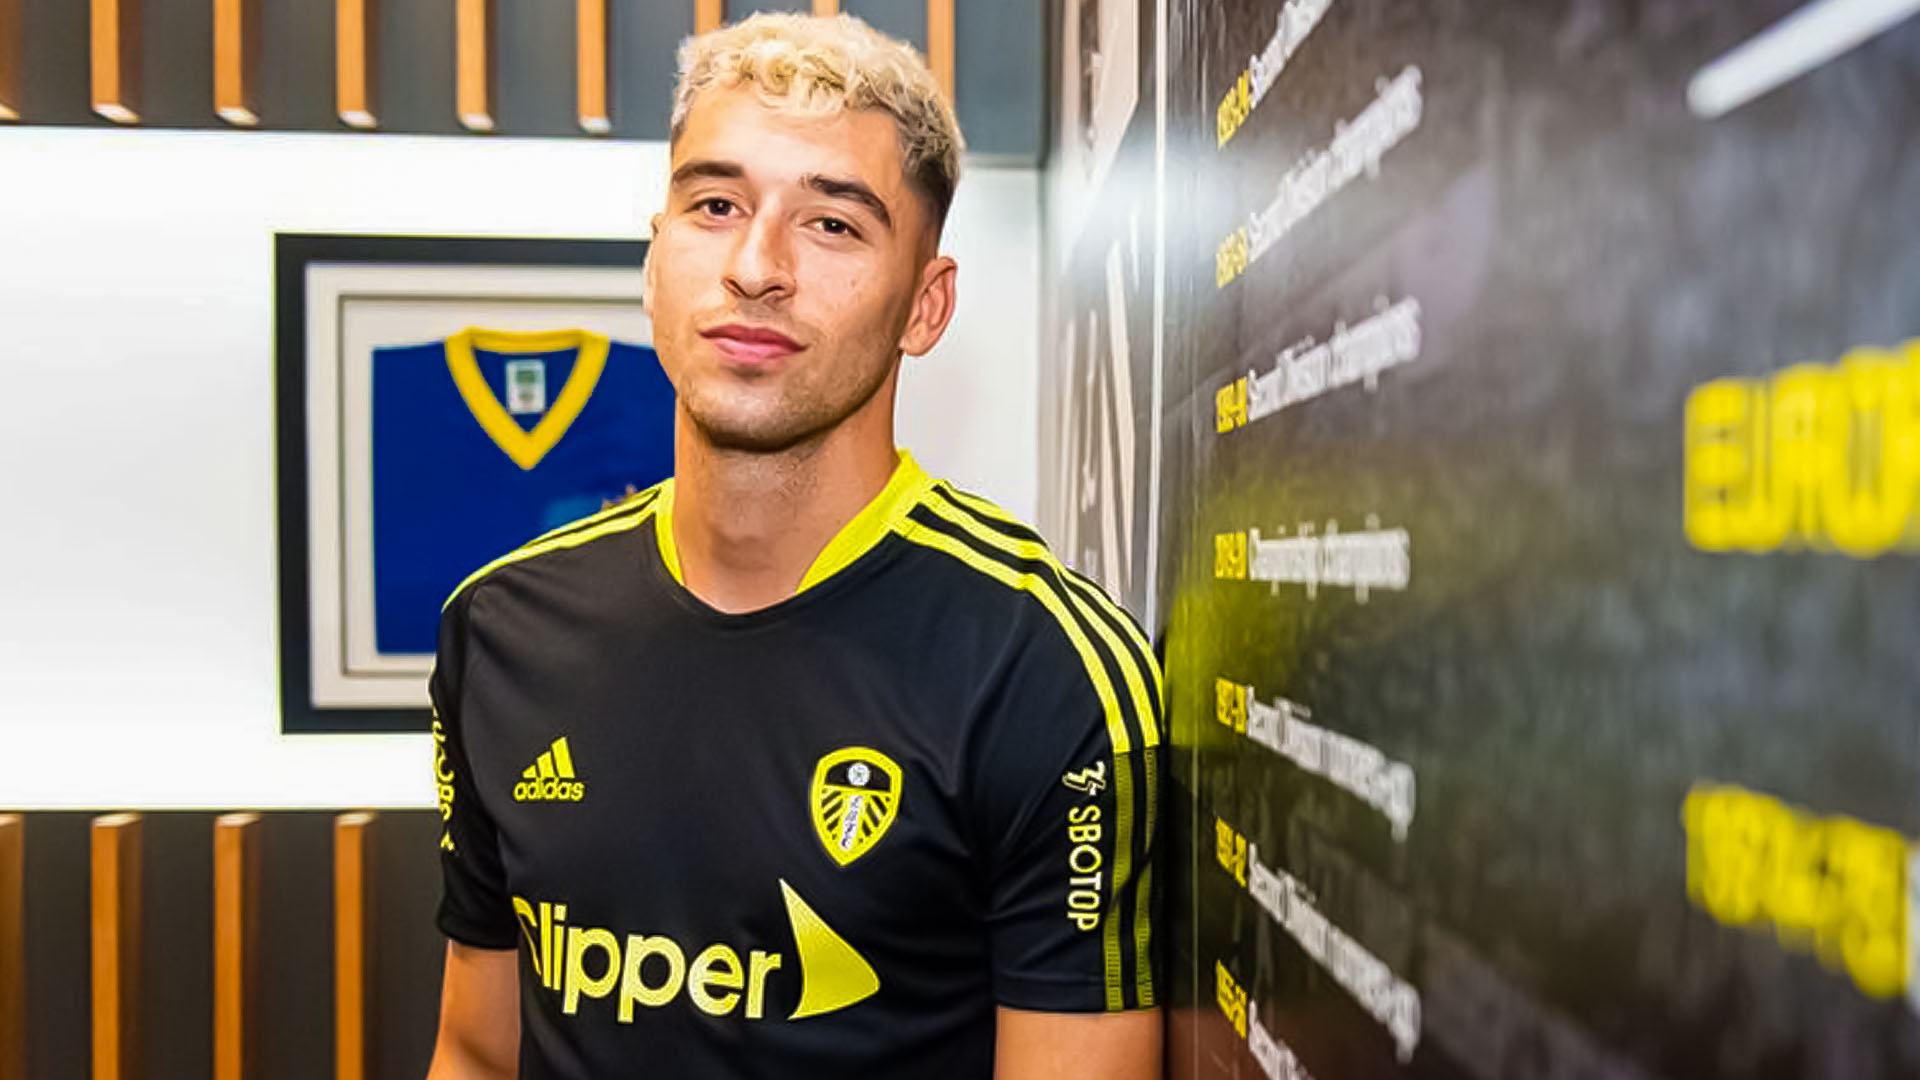 Leeds United sign Marc Roca on a four-year deal worth £10million